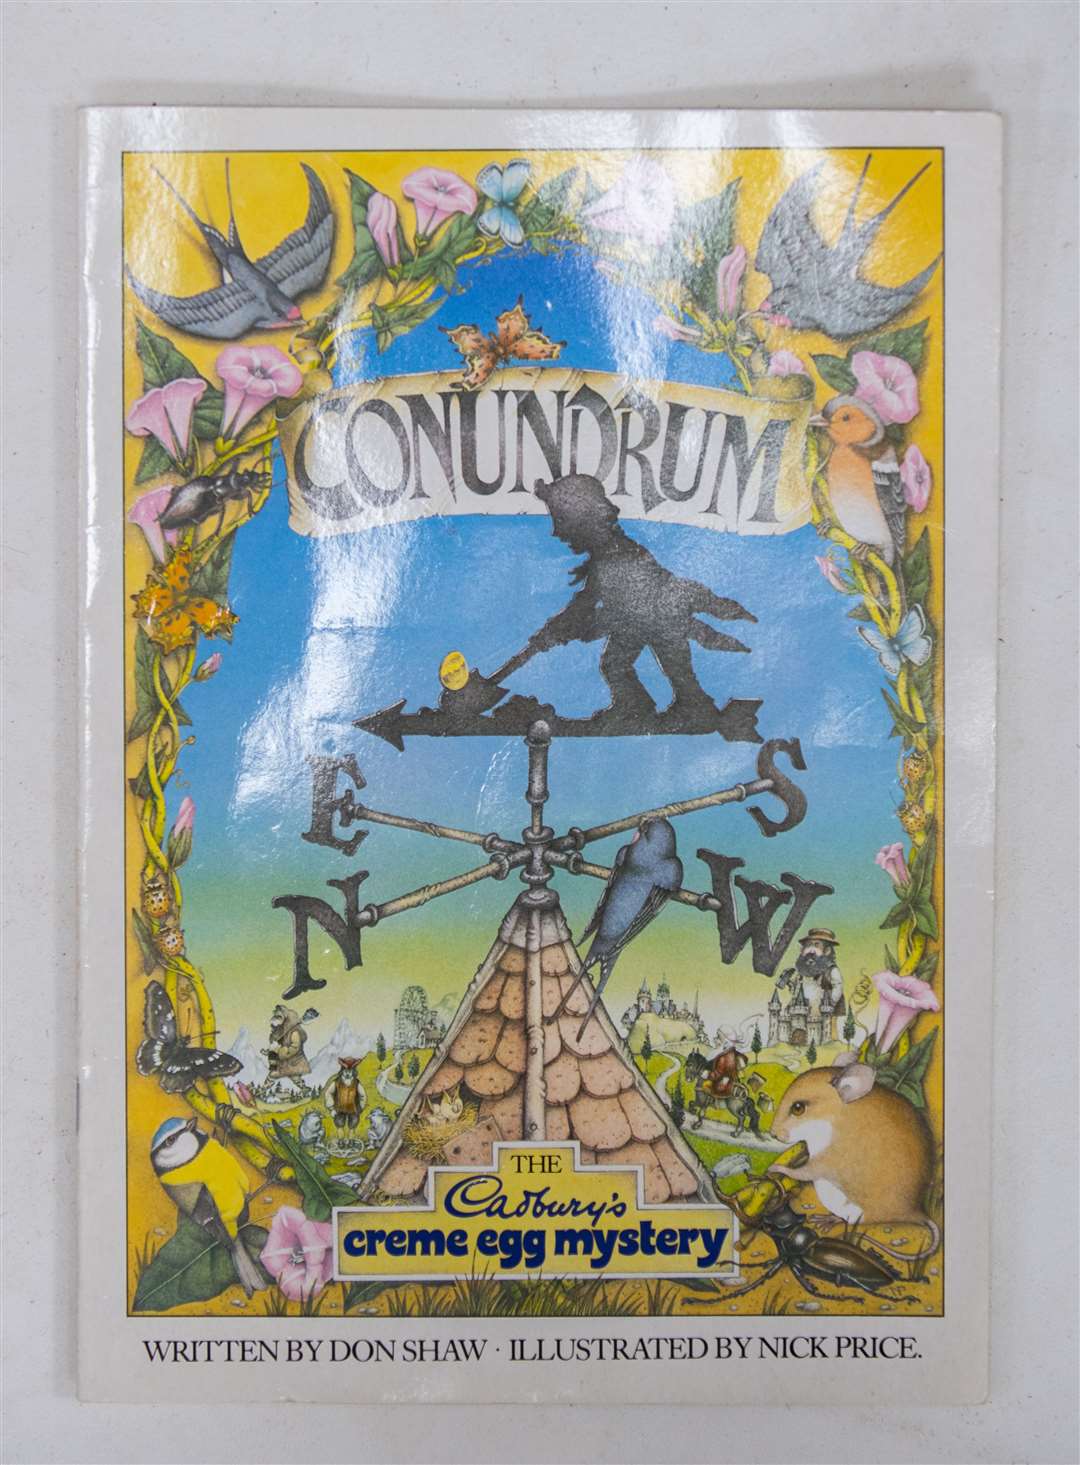 The egg was based on the front cover of the Cadbury’s Conundrum clue book (Joe Giddens/PA)